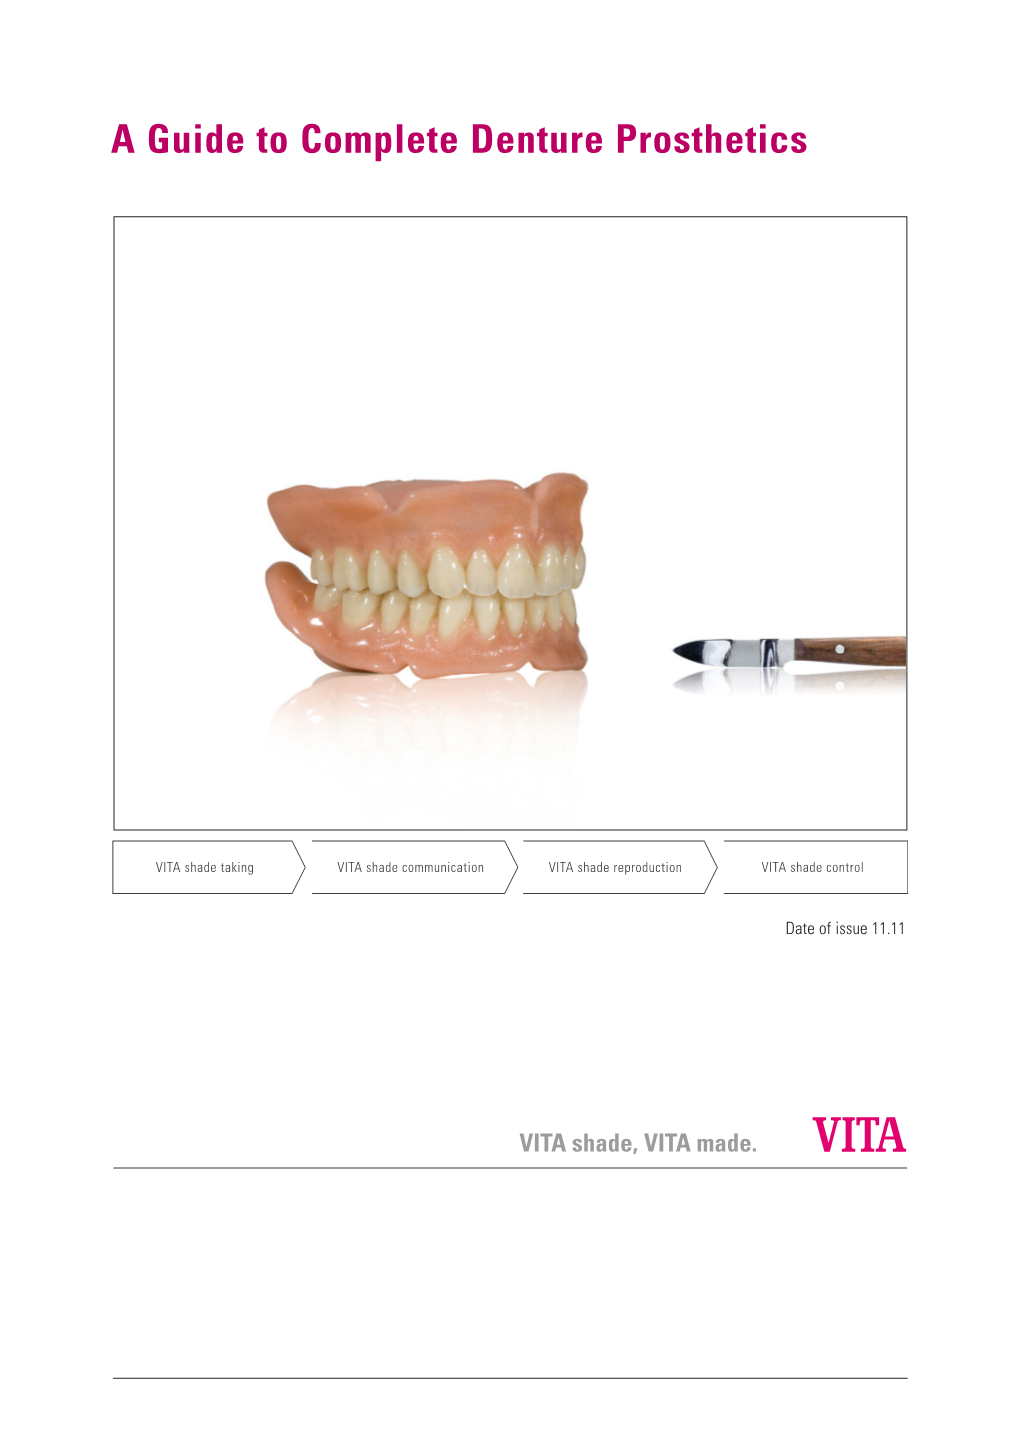 A Guide to Complete Denture Prosthetics